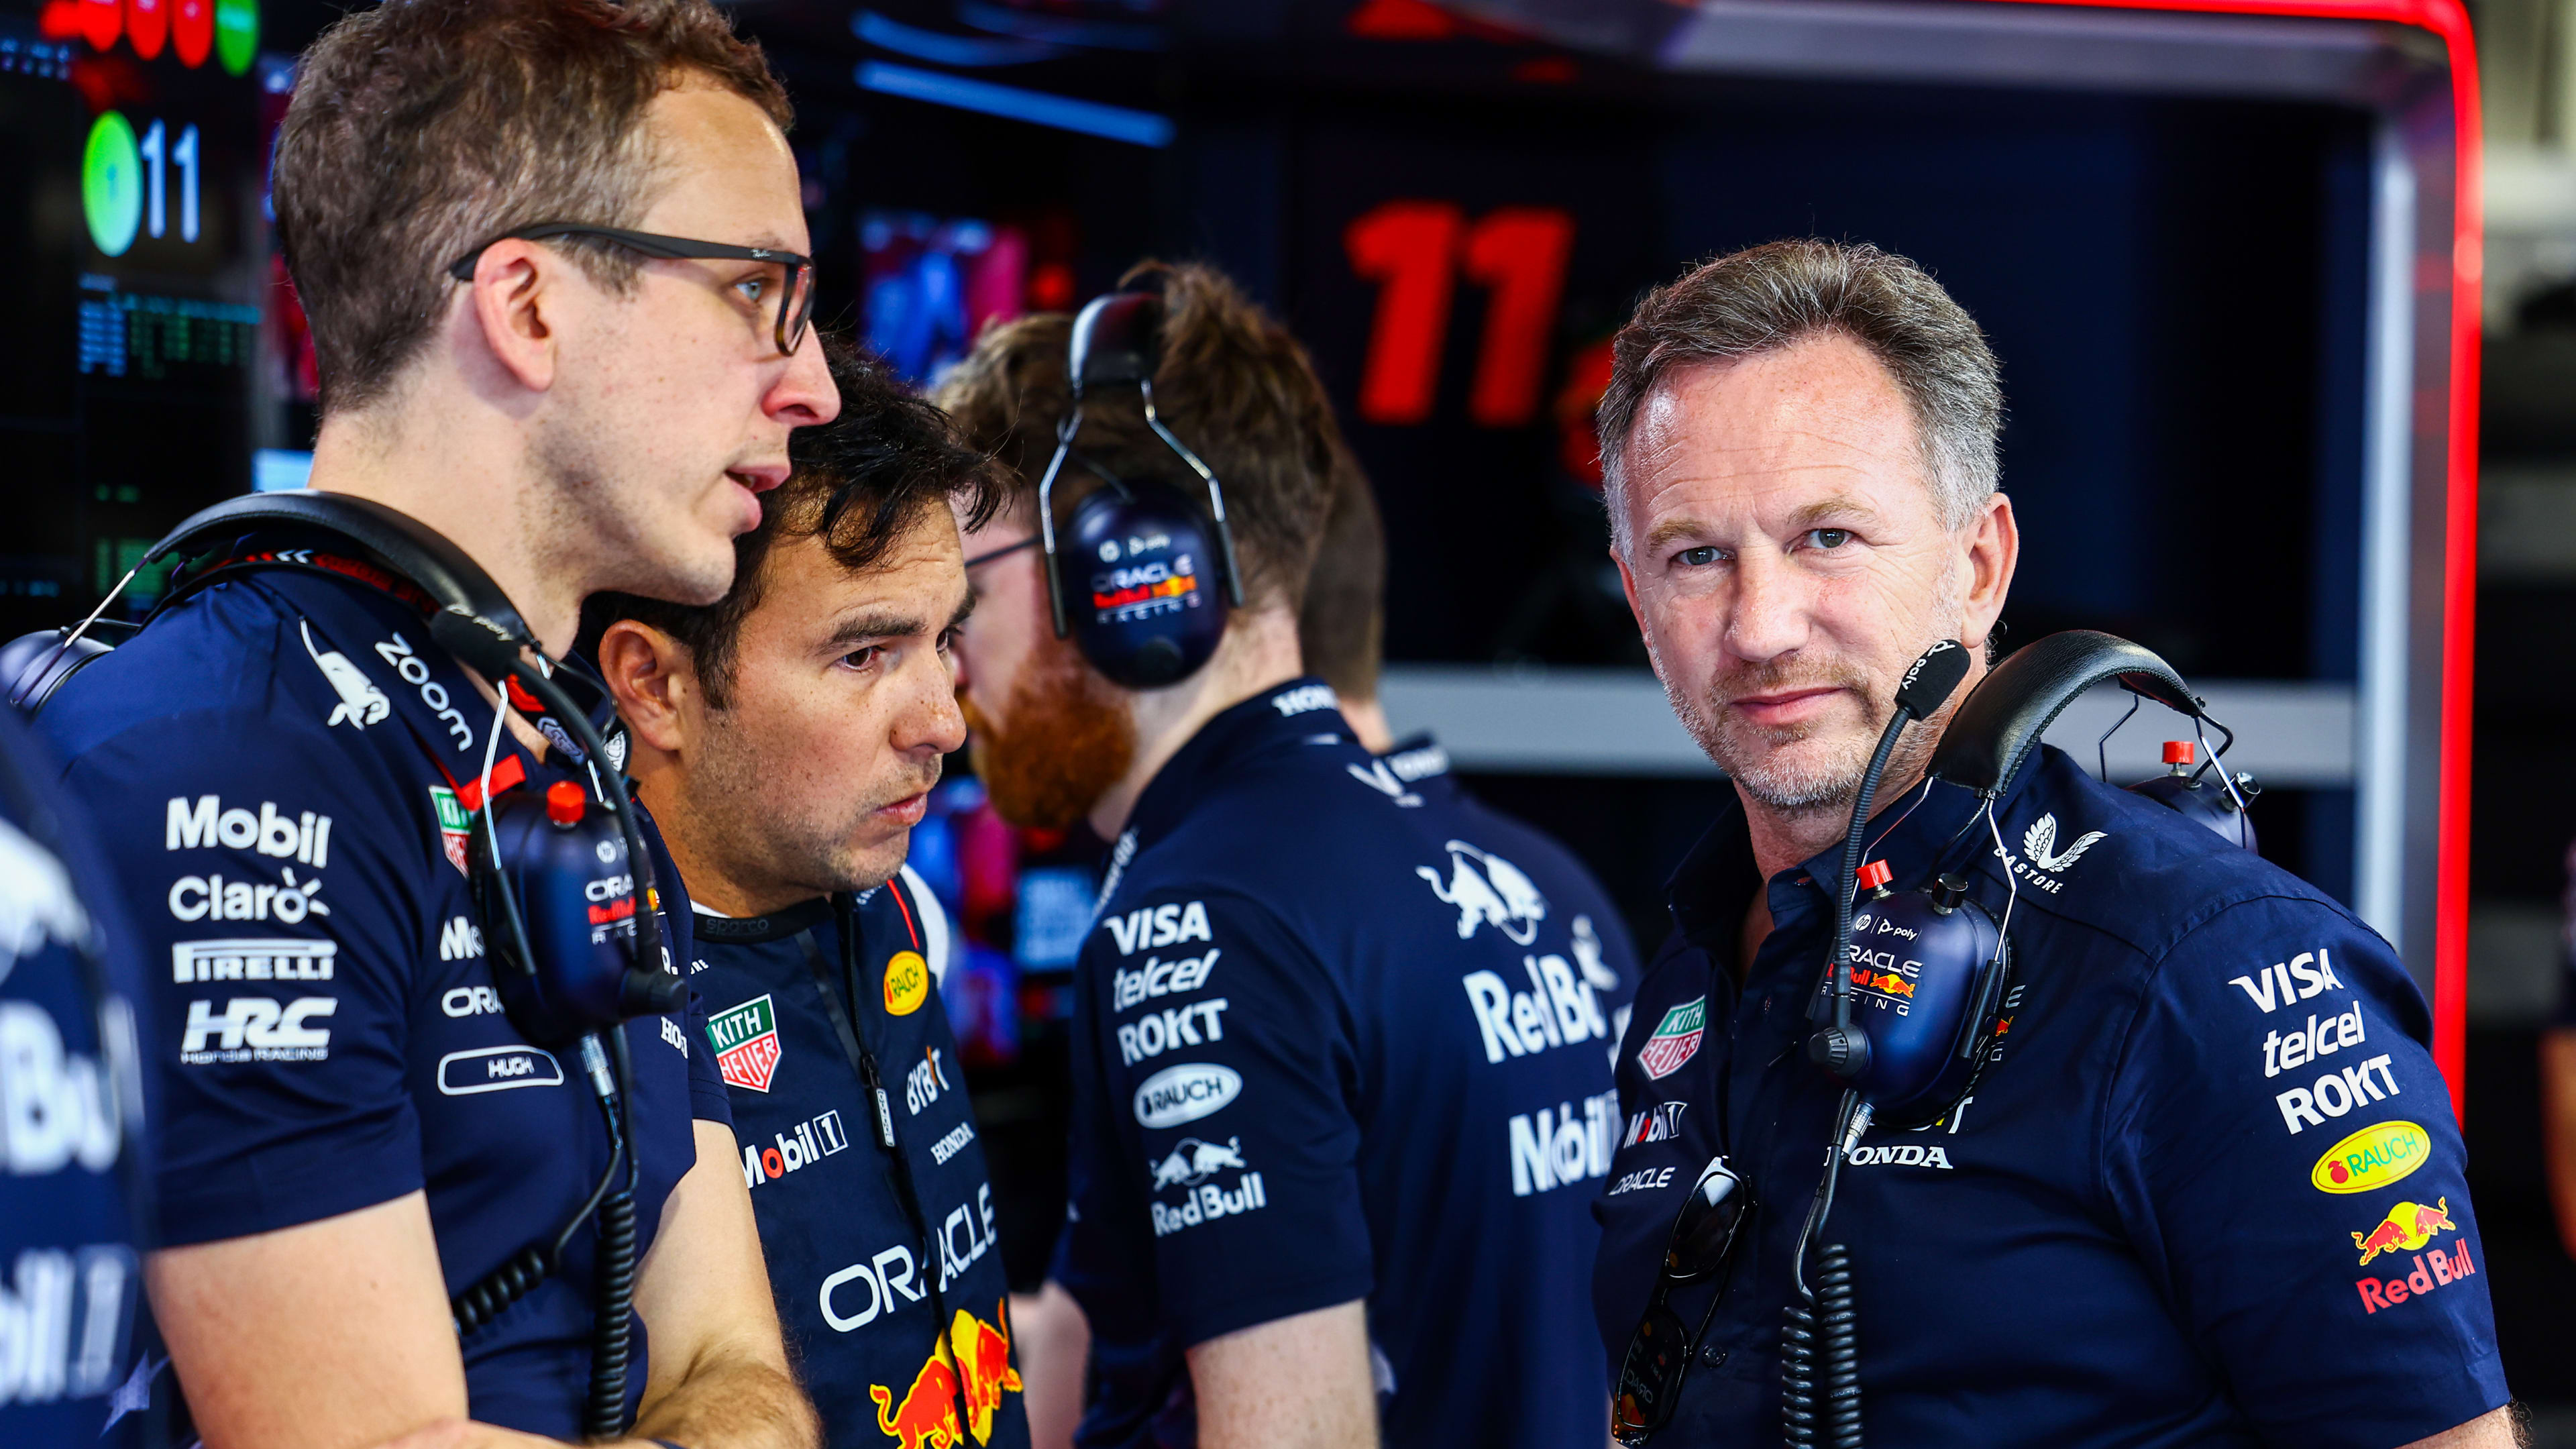 ‘He knows what’s at stake’ – Horner backs Perez to find his form after ‘horrible’ weekend in Canada